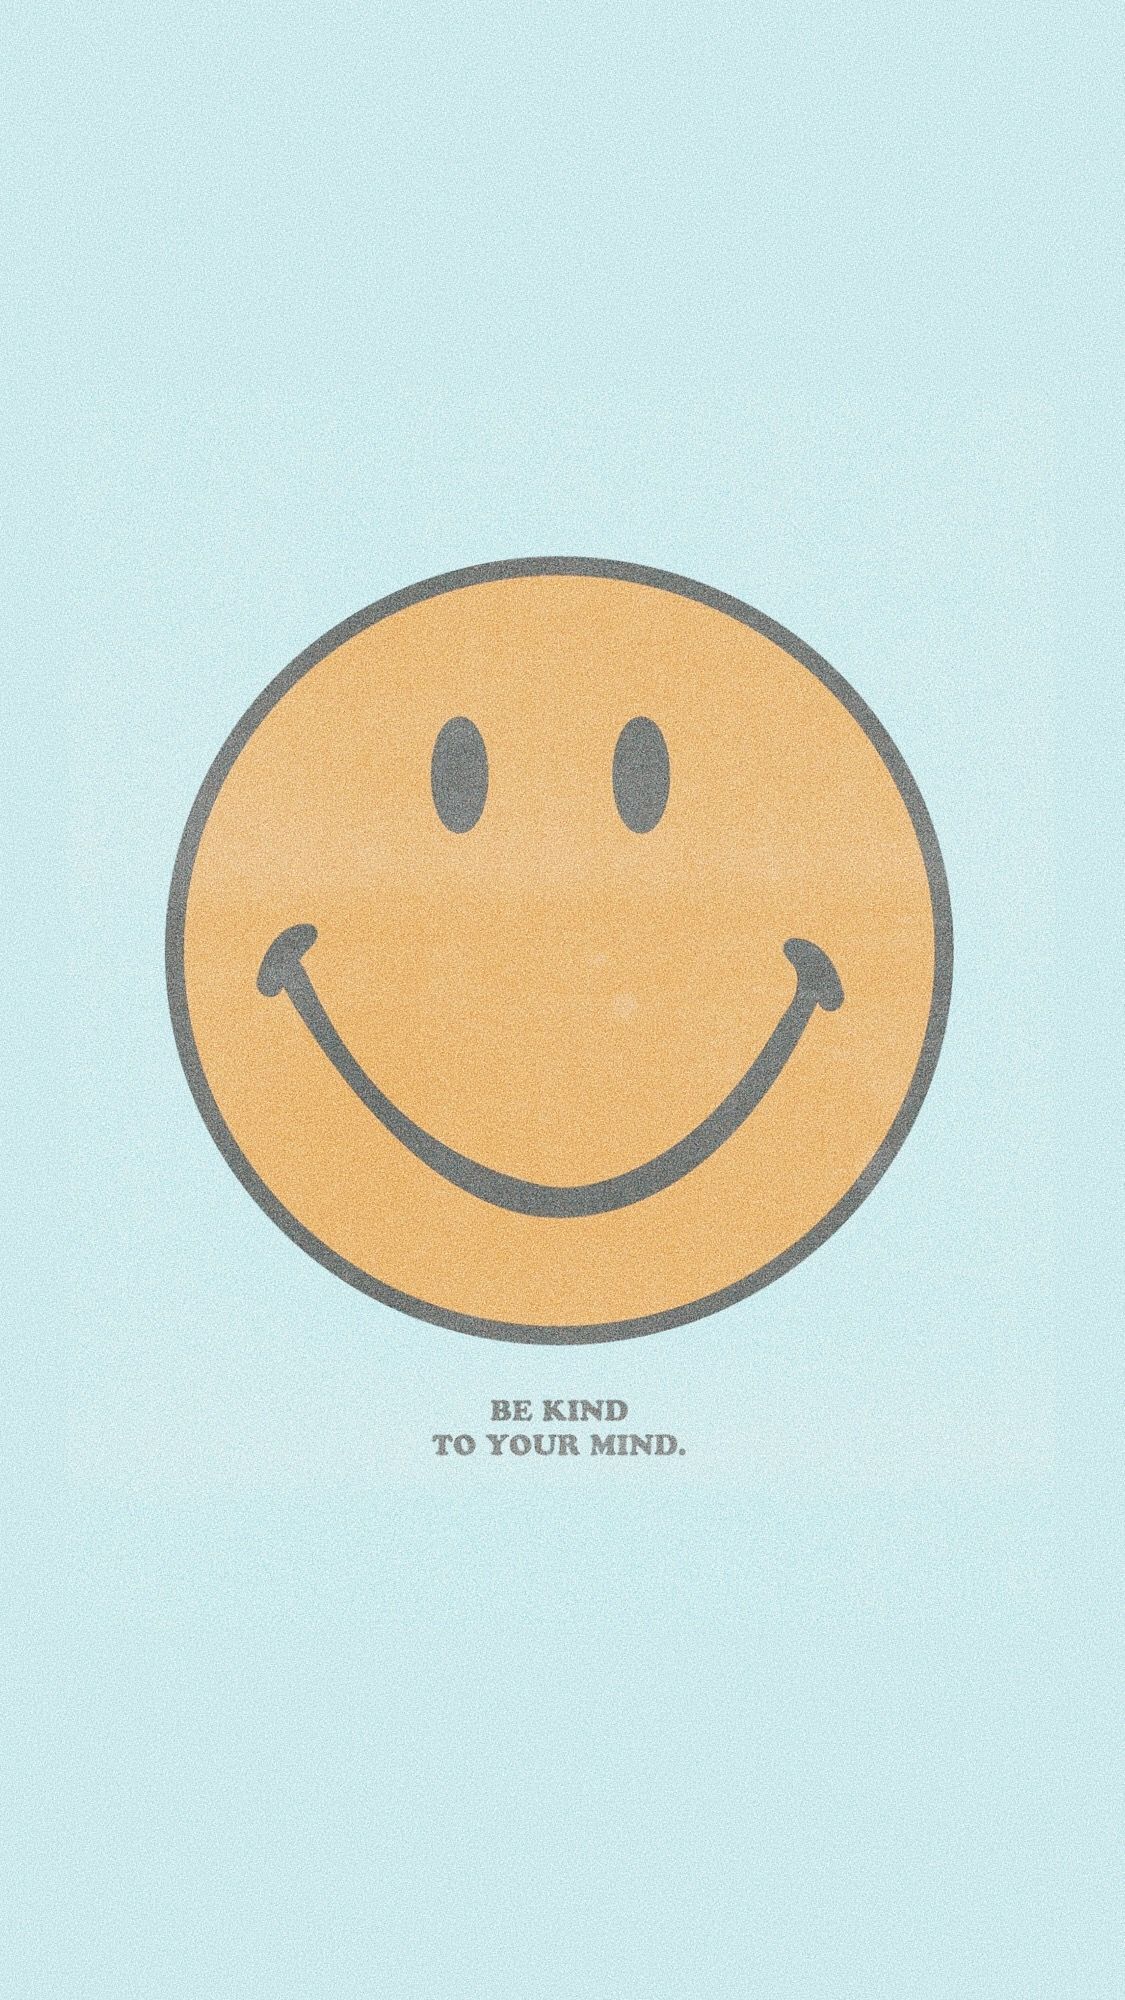 A phone wallpaper with a smiley face and the words 